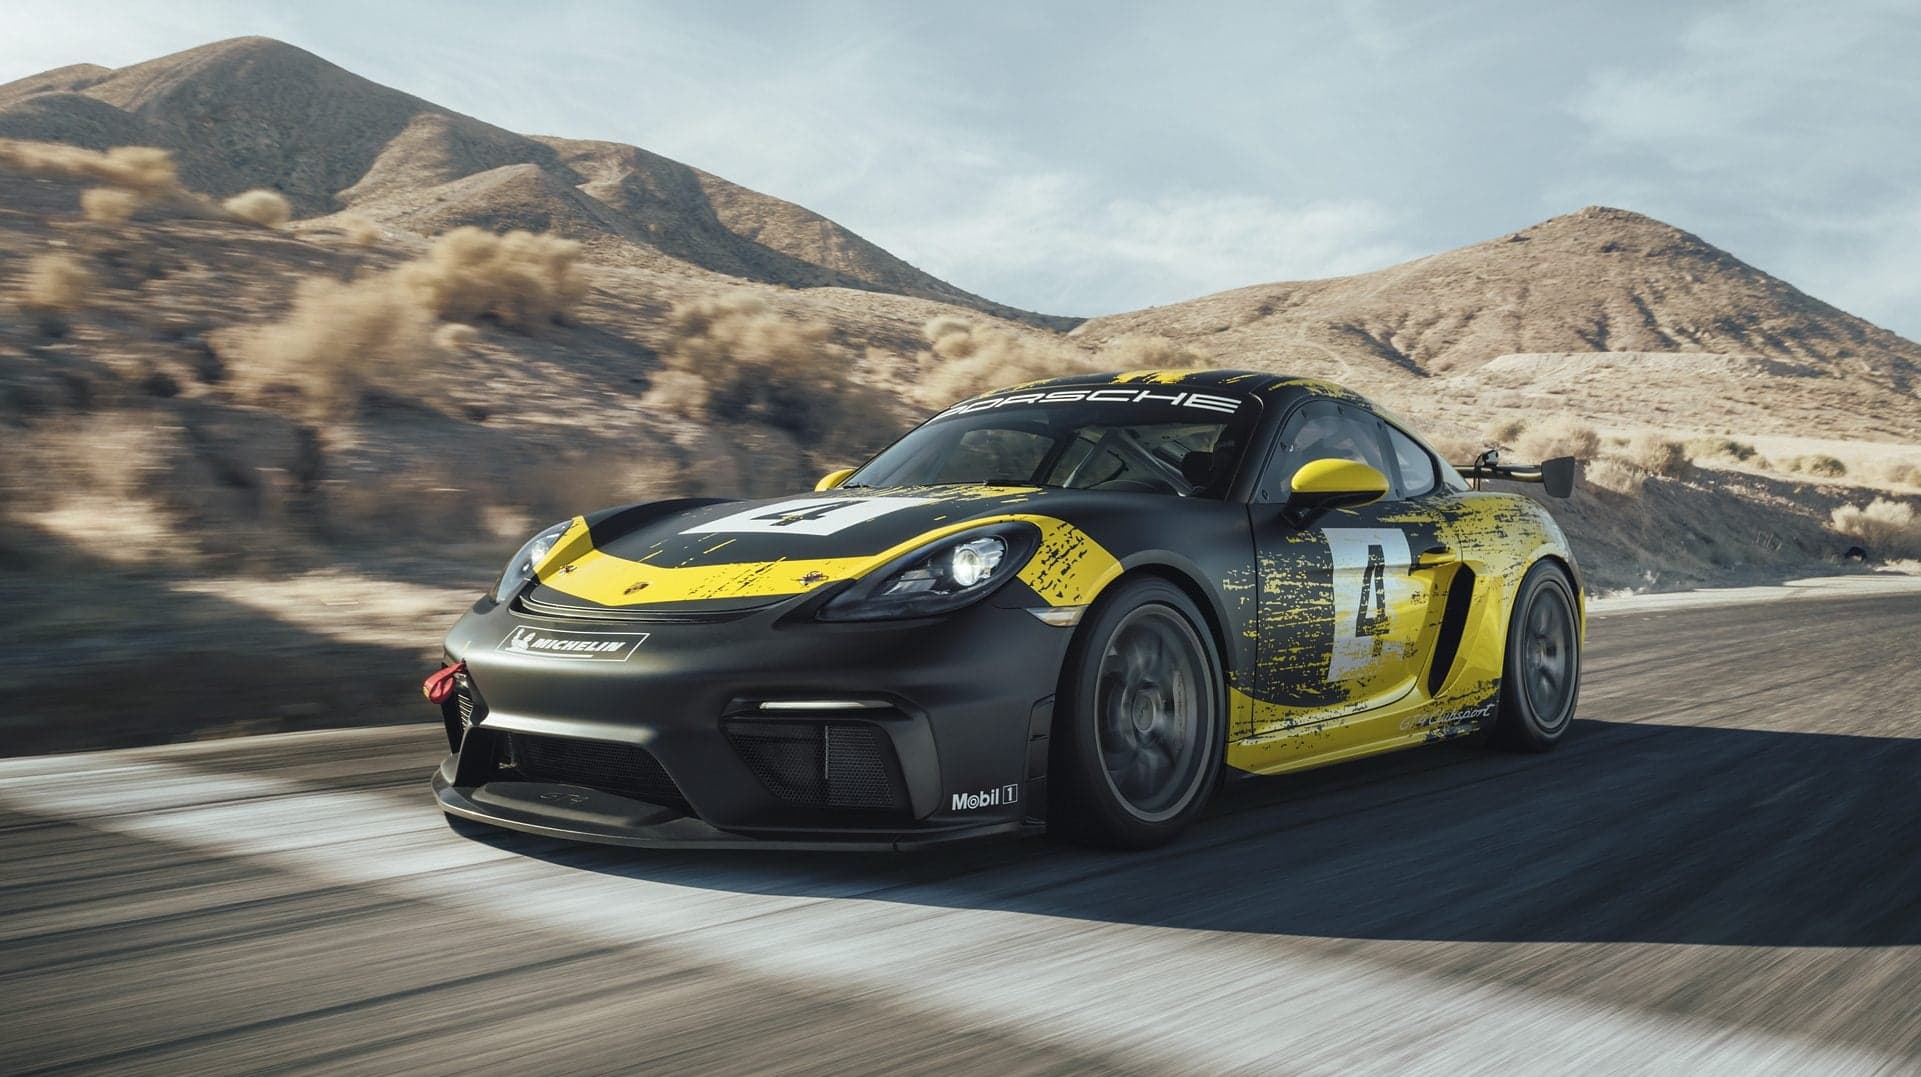 2019 Porsche Cayman GT4 Clubsport: Lighter, Faster and…More Sustainable?